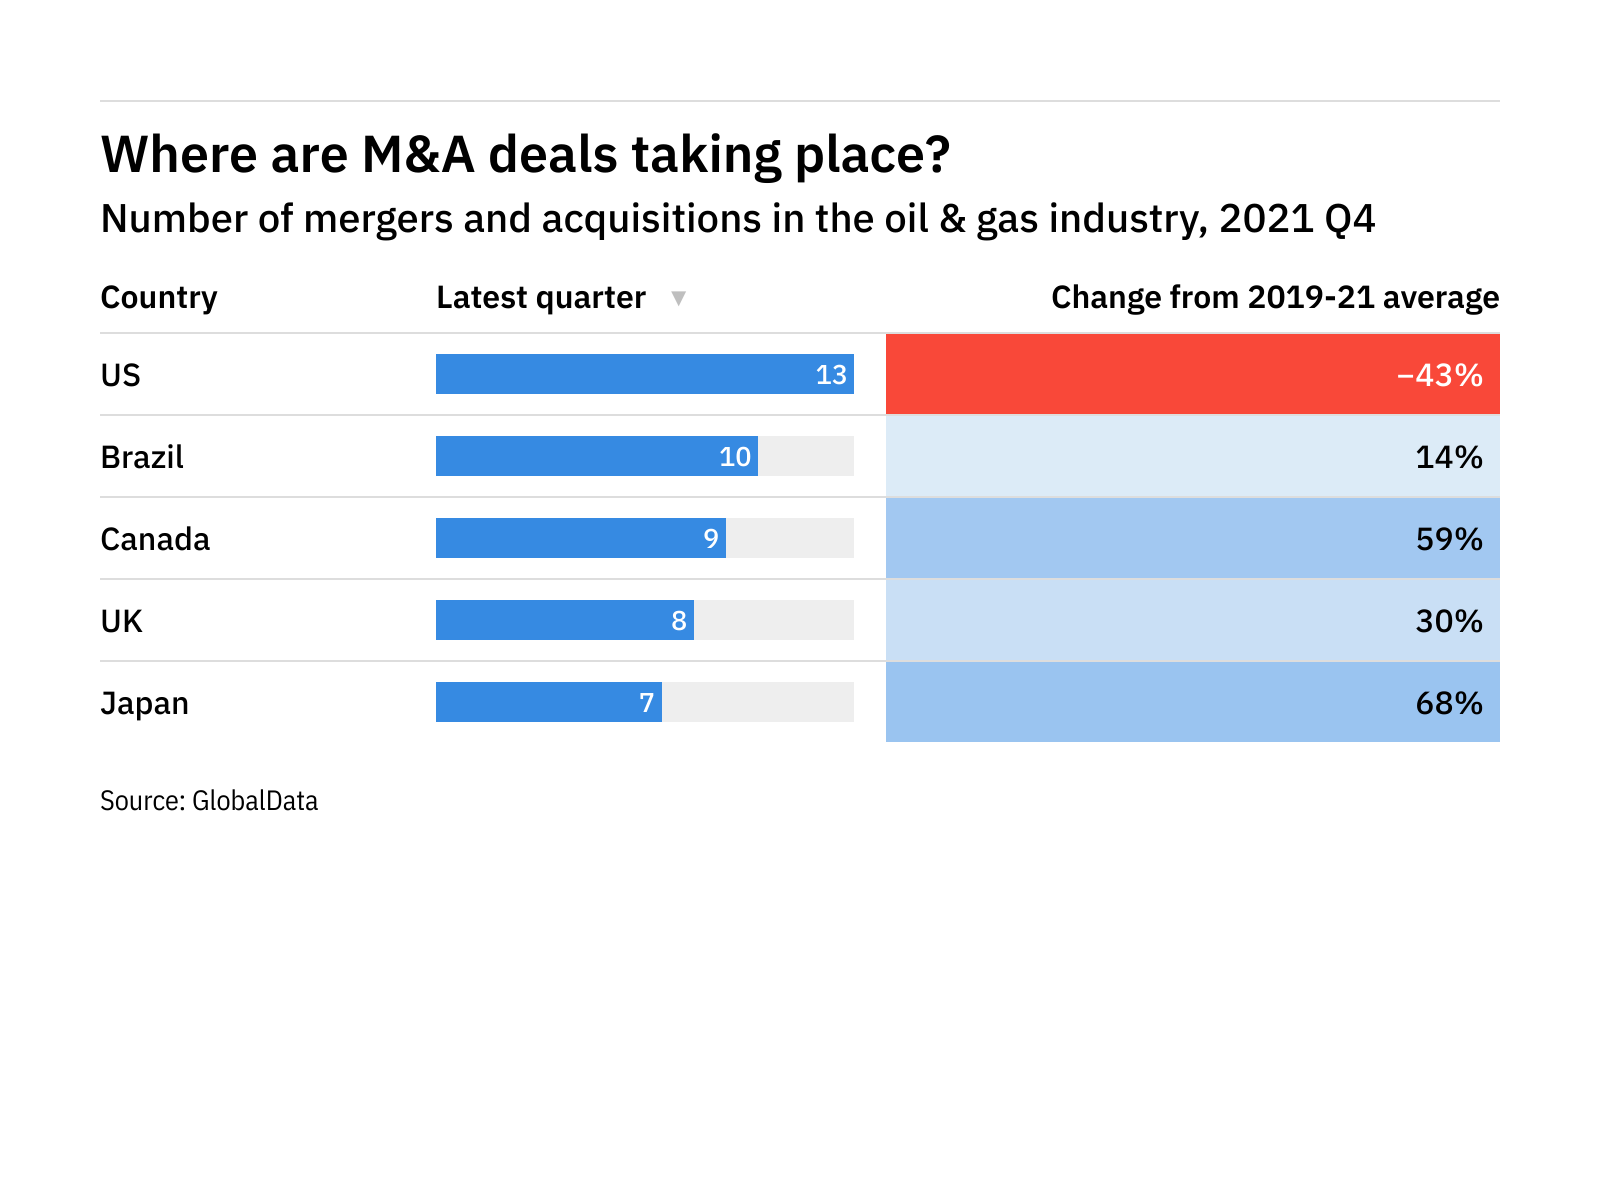 Revealed: top and emerging locations for M&A deals in the oil & gas industry